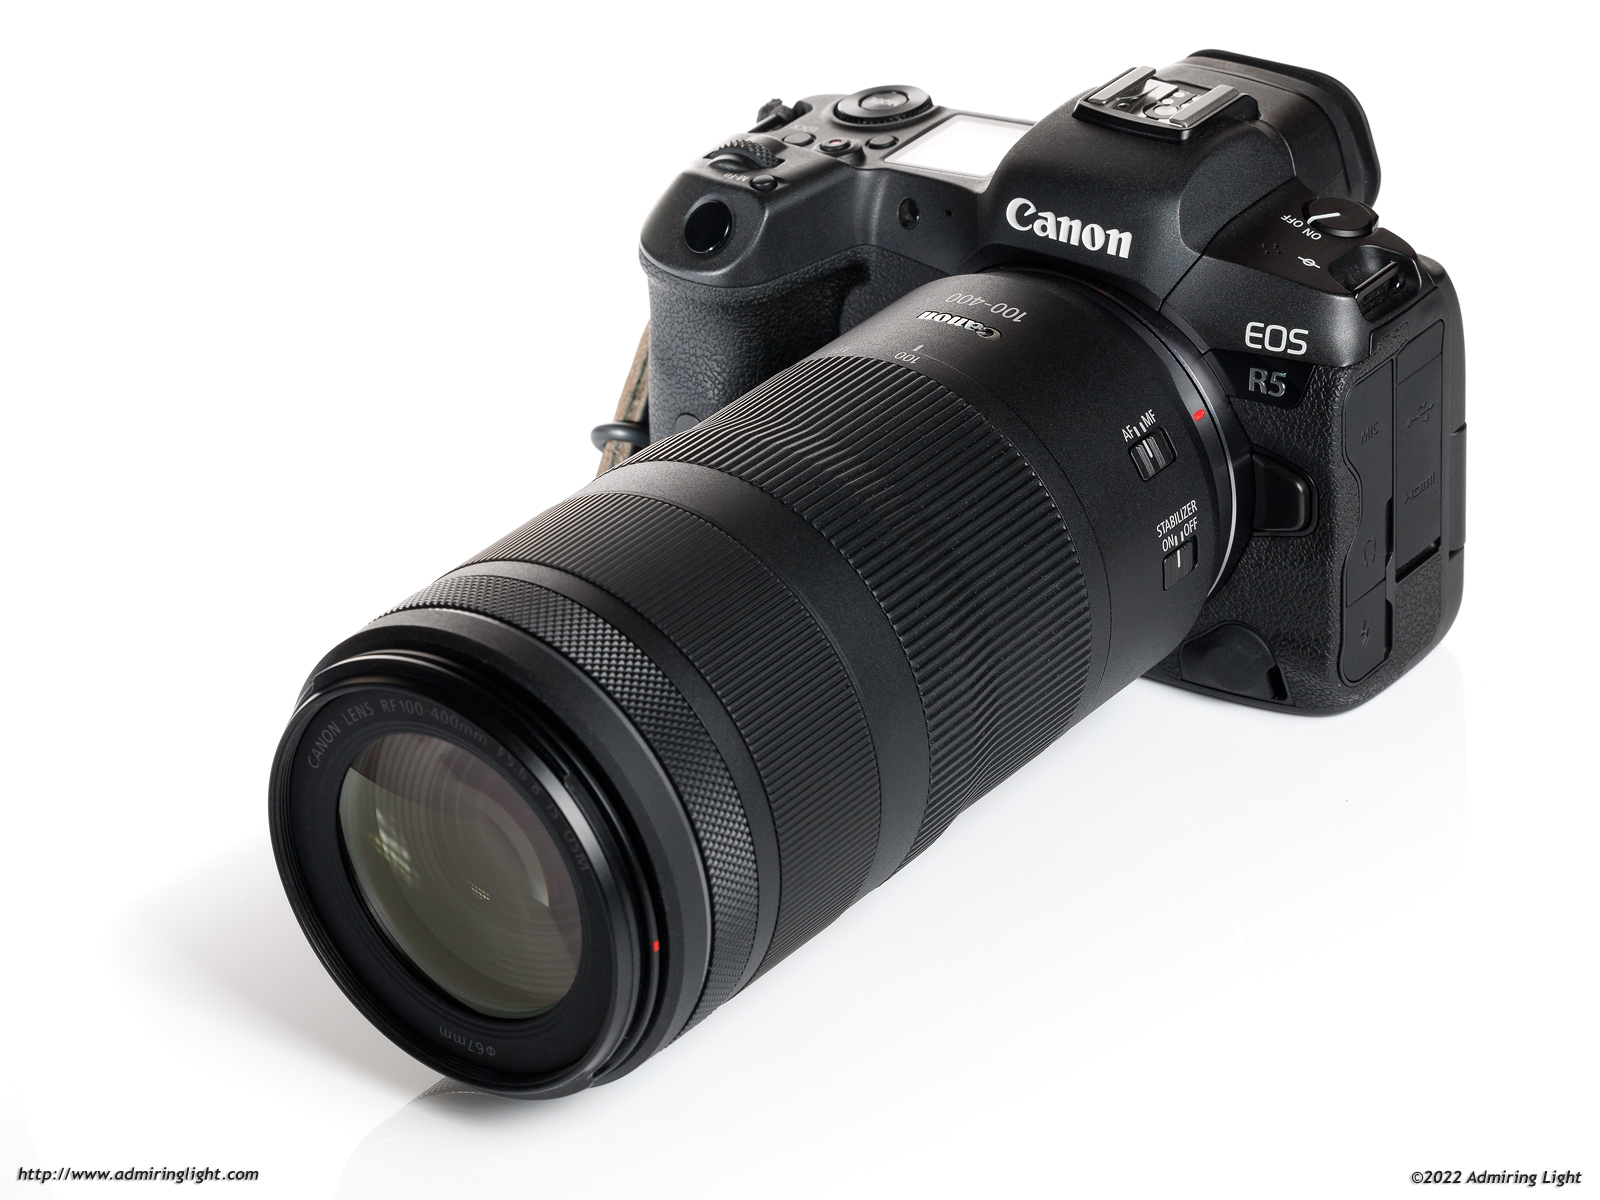 Review: Canon RF 100-400mm f/5.6-8 IS USM - Page 3 of 3 - Admiring